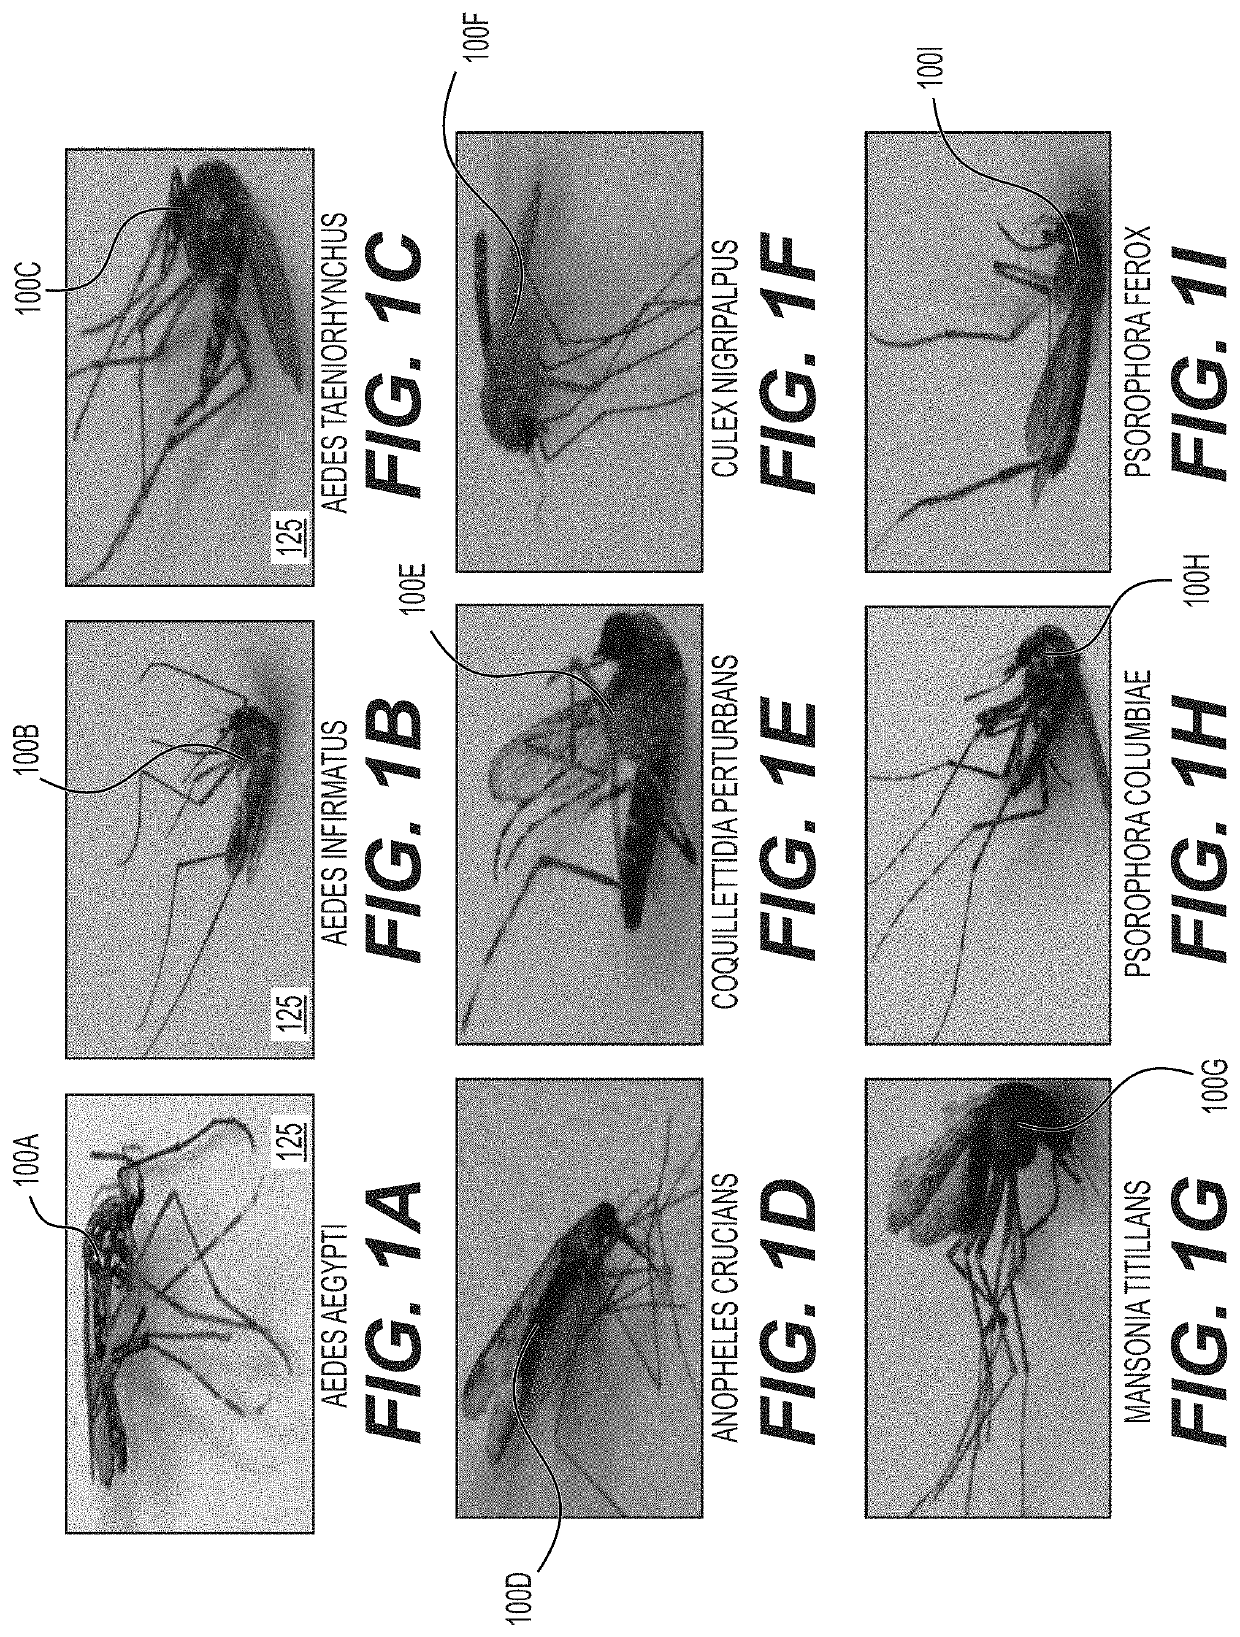 Leveraging smart-phone cameras and image processing techniques to classify mosquito genus and species